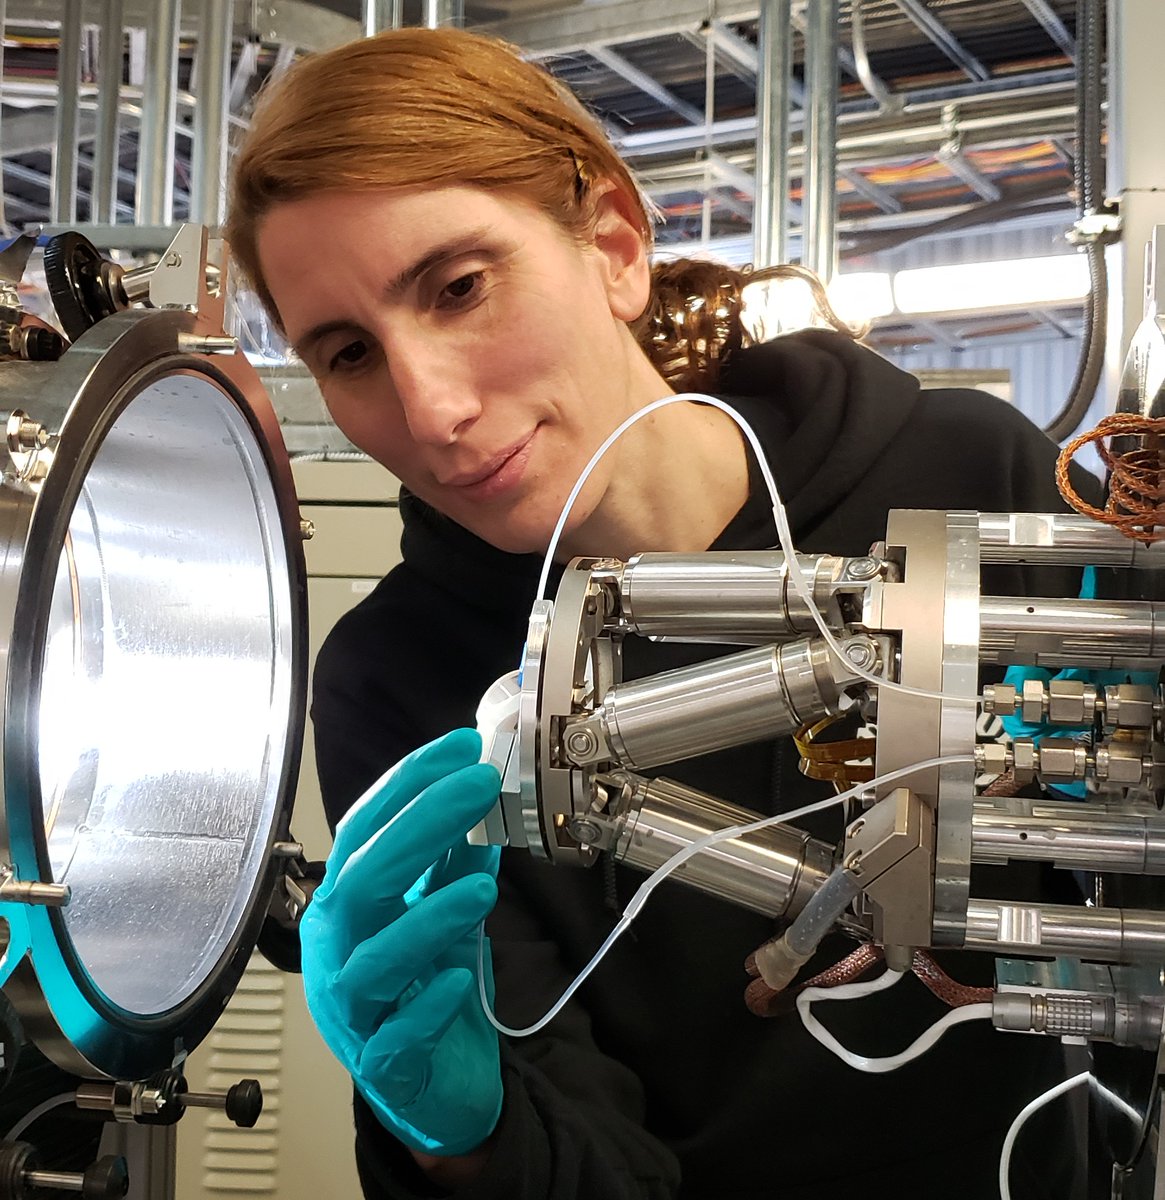 #OnTheBeamlines: Erica Pensini @GuelphEng @uofg used several beamlines at the CLS to help develop new methods for purifying contaminated #water in #aquifers using benign chemical compounds called amphiphiles. More: bit.ly/3QIAtuN #environment #pollution #cleanwater